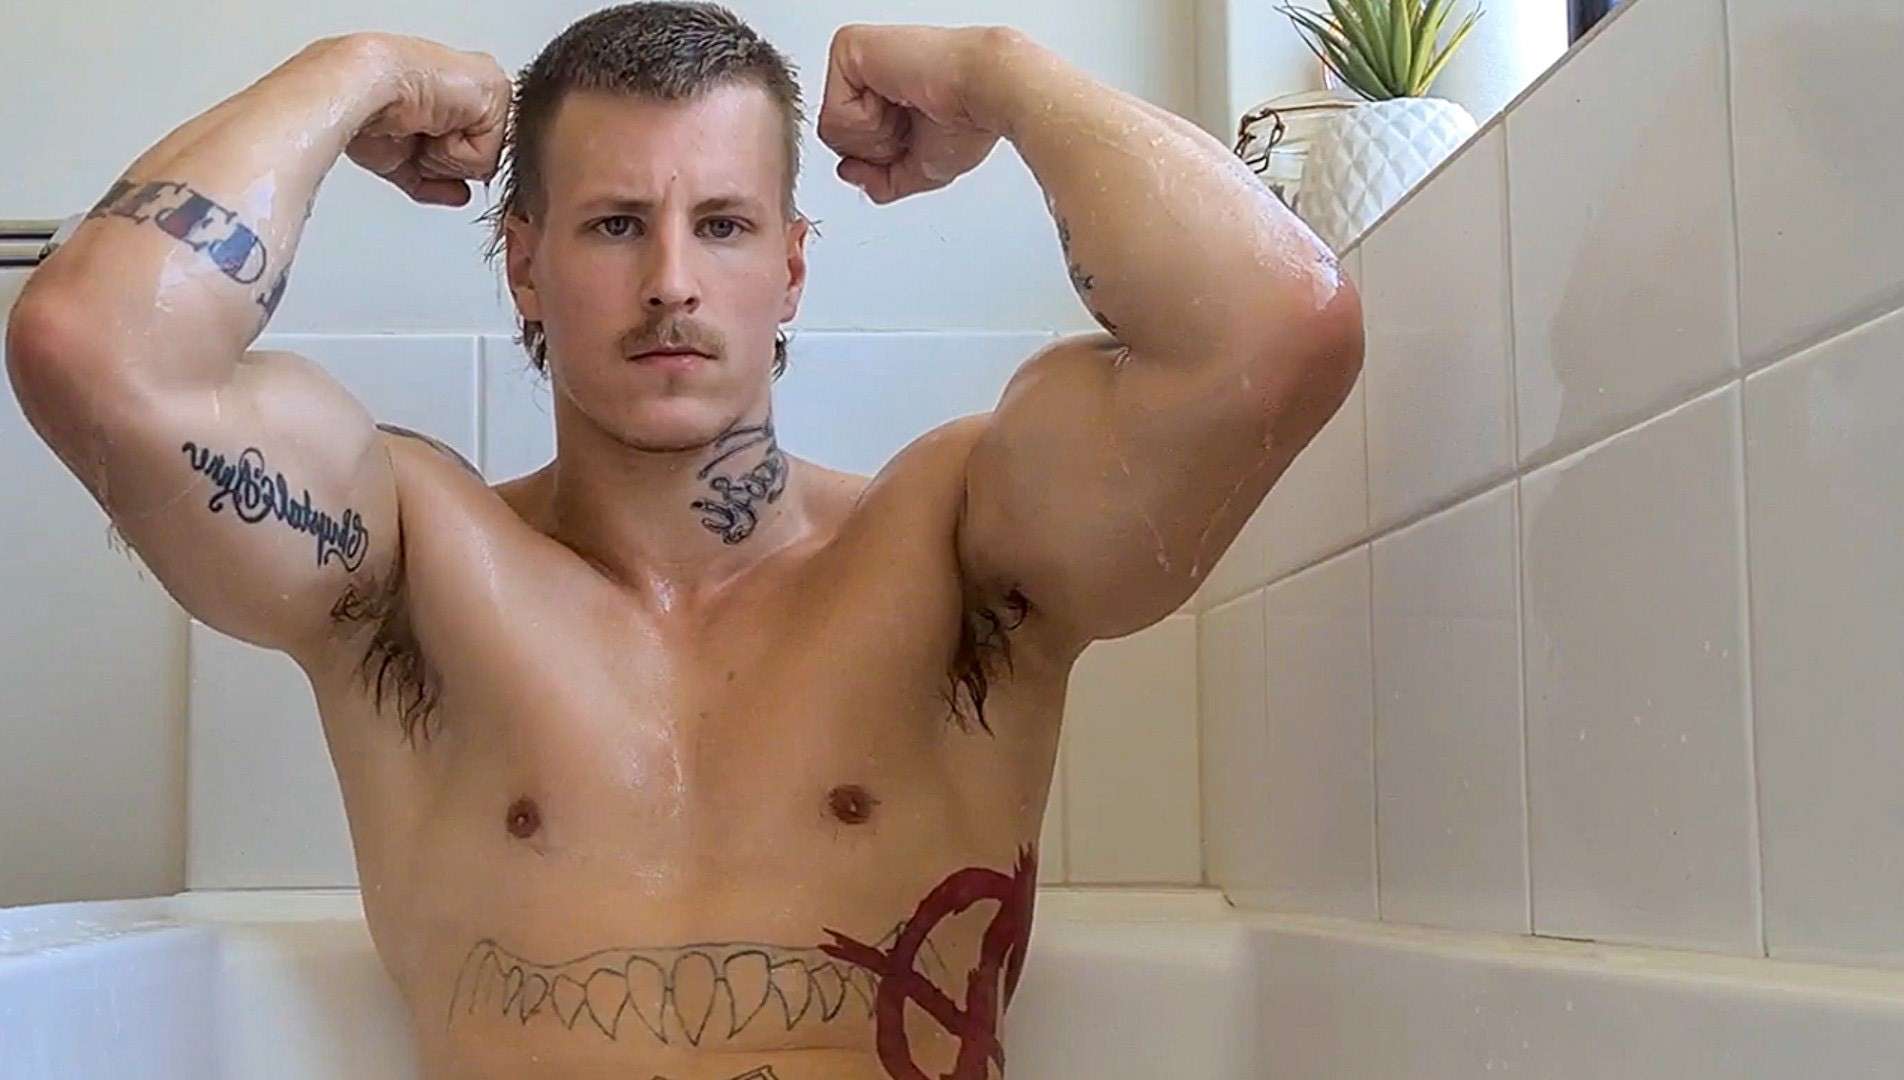 Alec Nysten turned to an OnlyFans explicit porn account to provide a family income, but image theft now threatens to ruin it picture